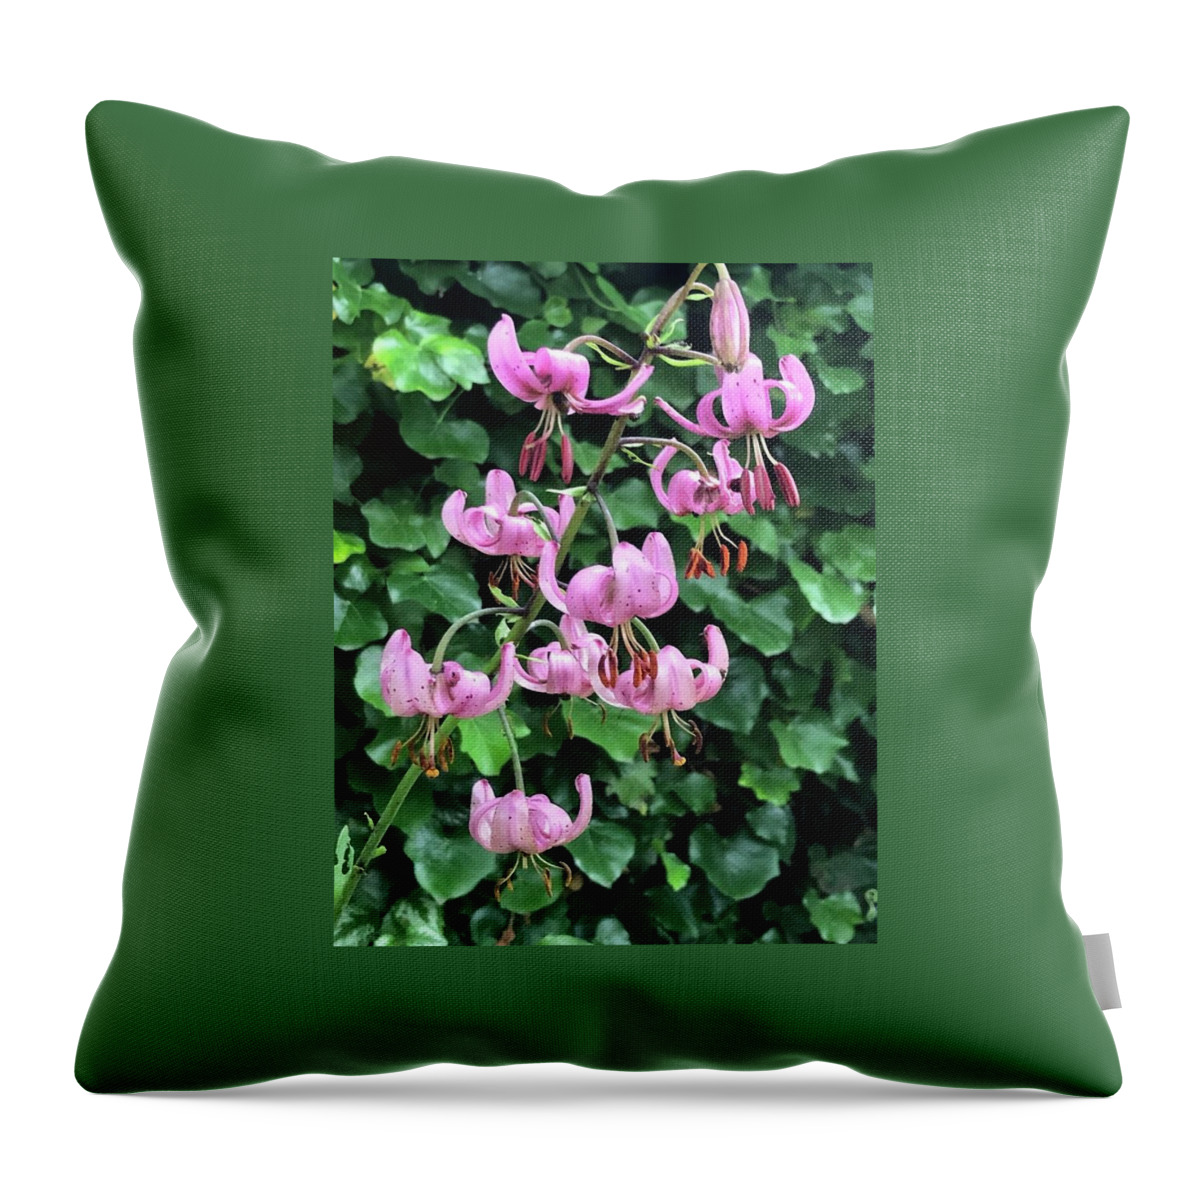 Arabian Lily Throw Pillow featuring the photograph Arabian Lily by Mark Egerton